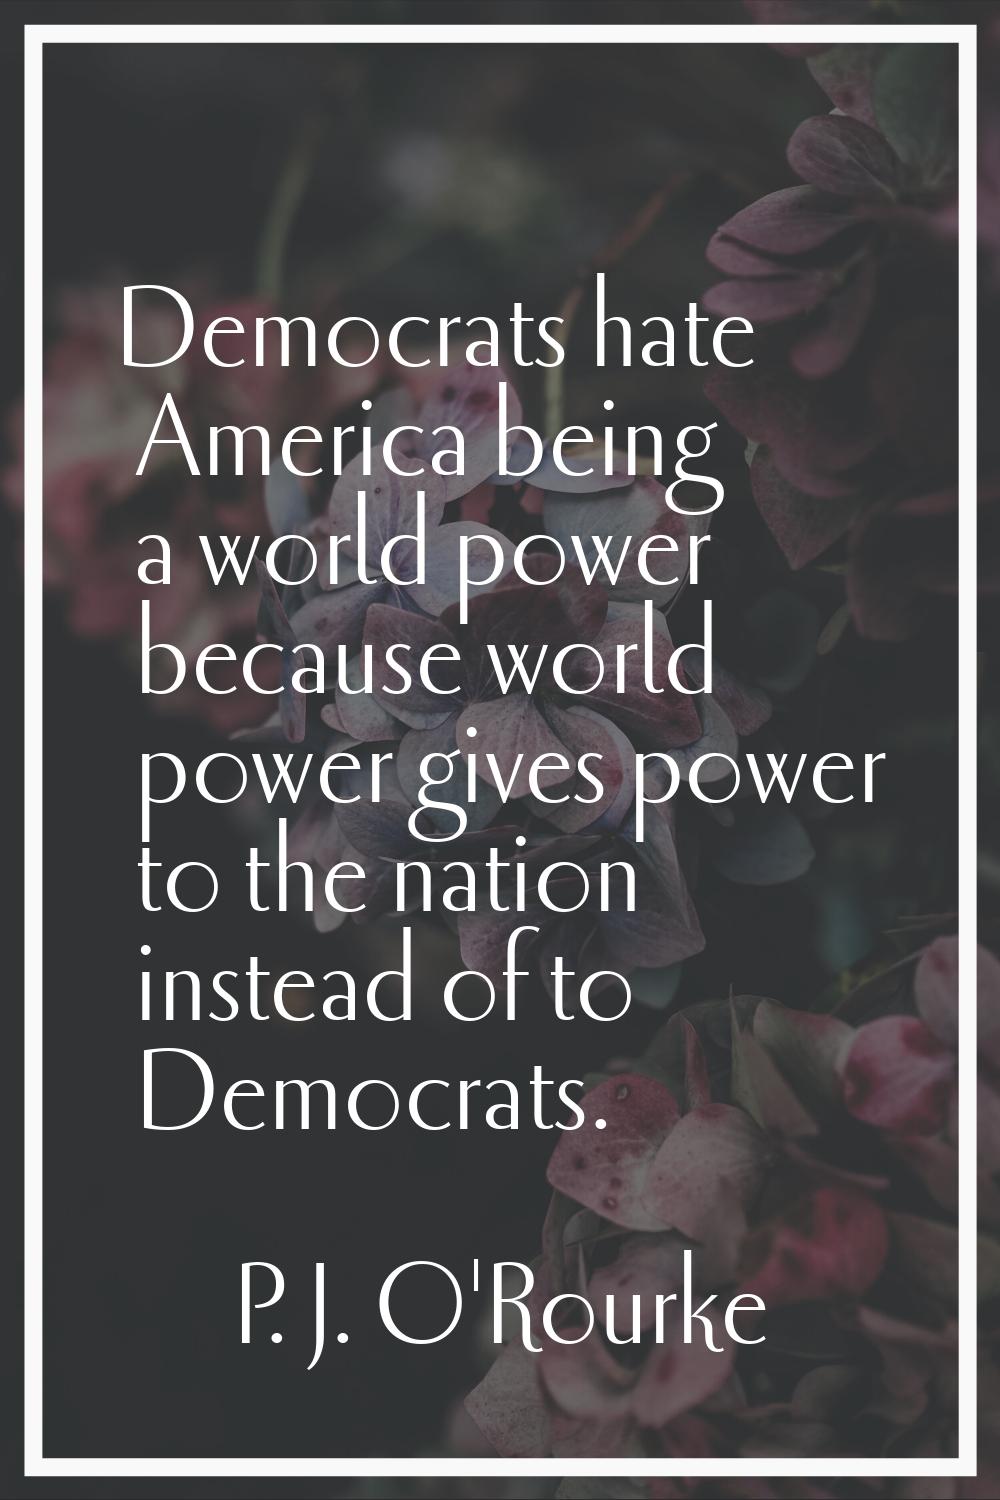 Democrats hate America being a world power because world power gives power to the nation instead of